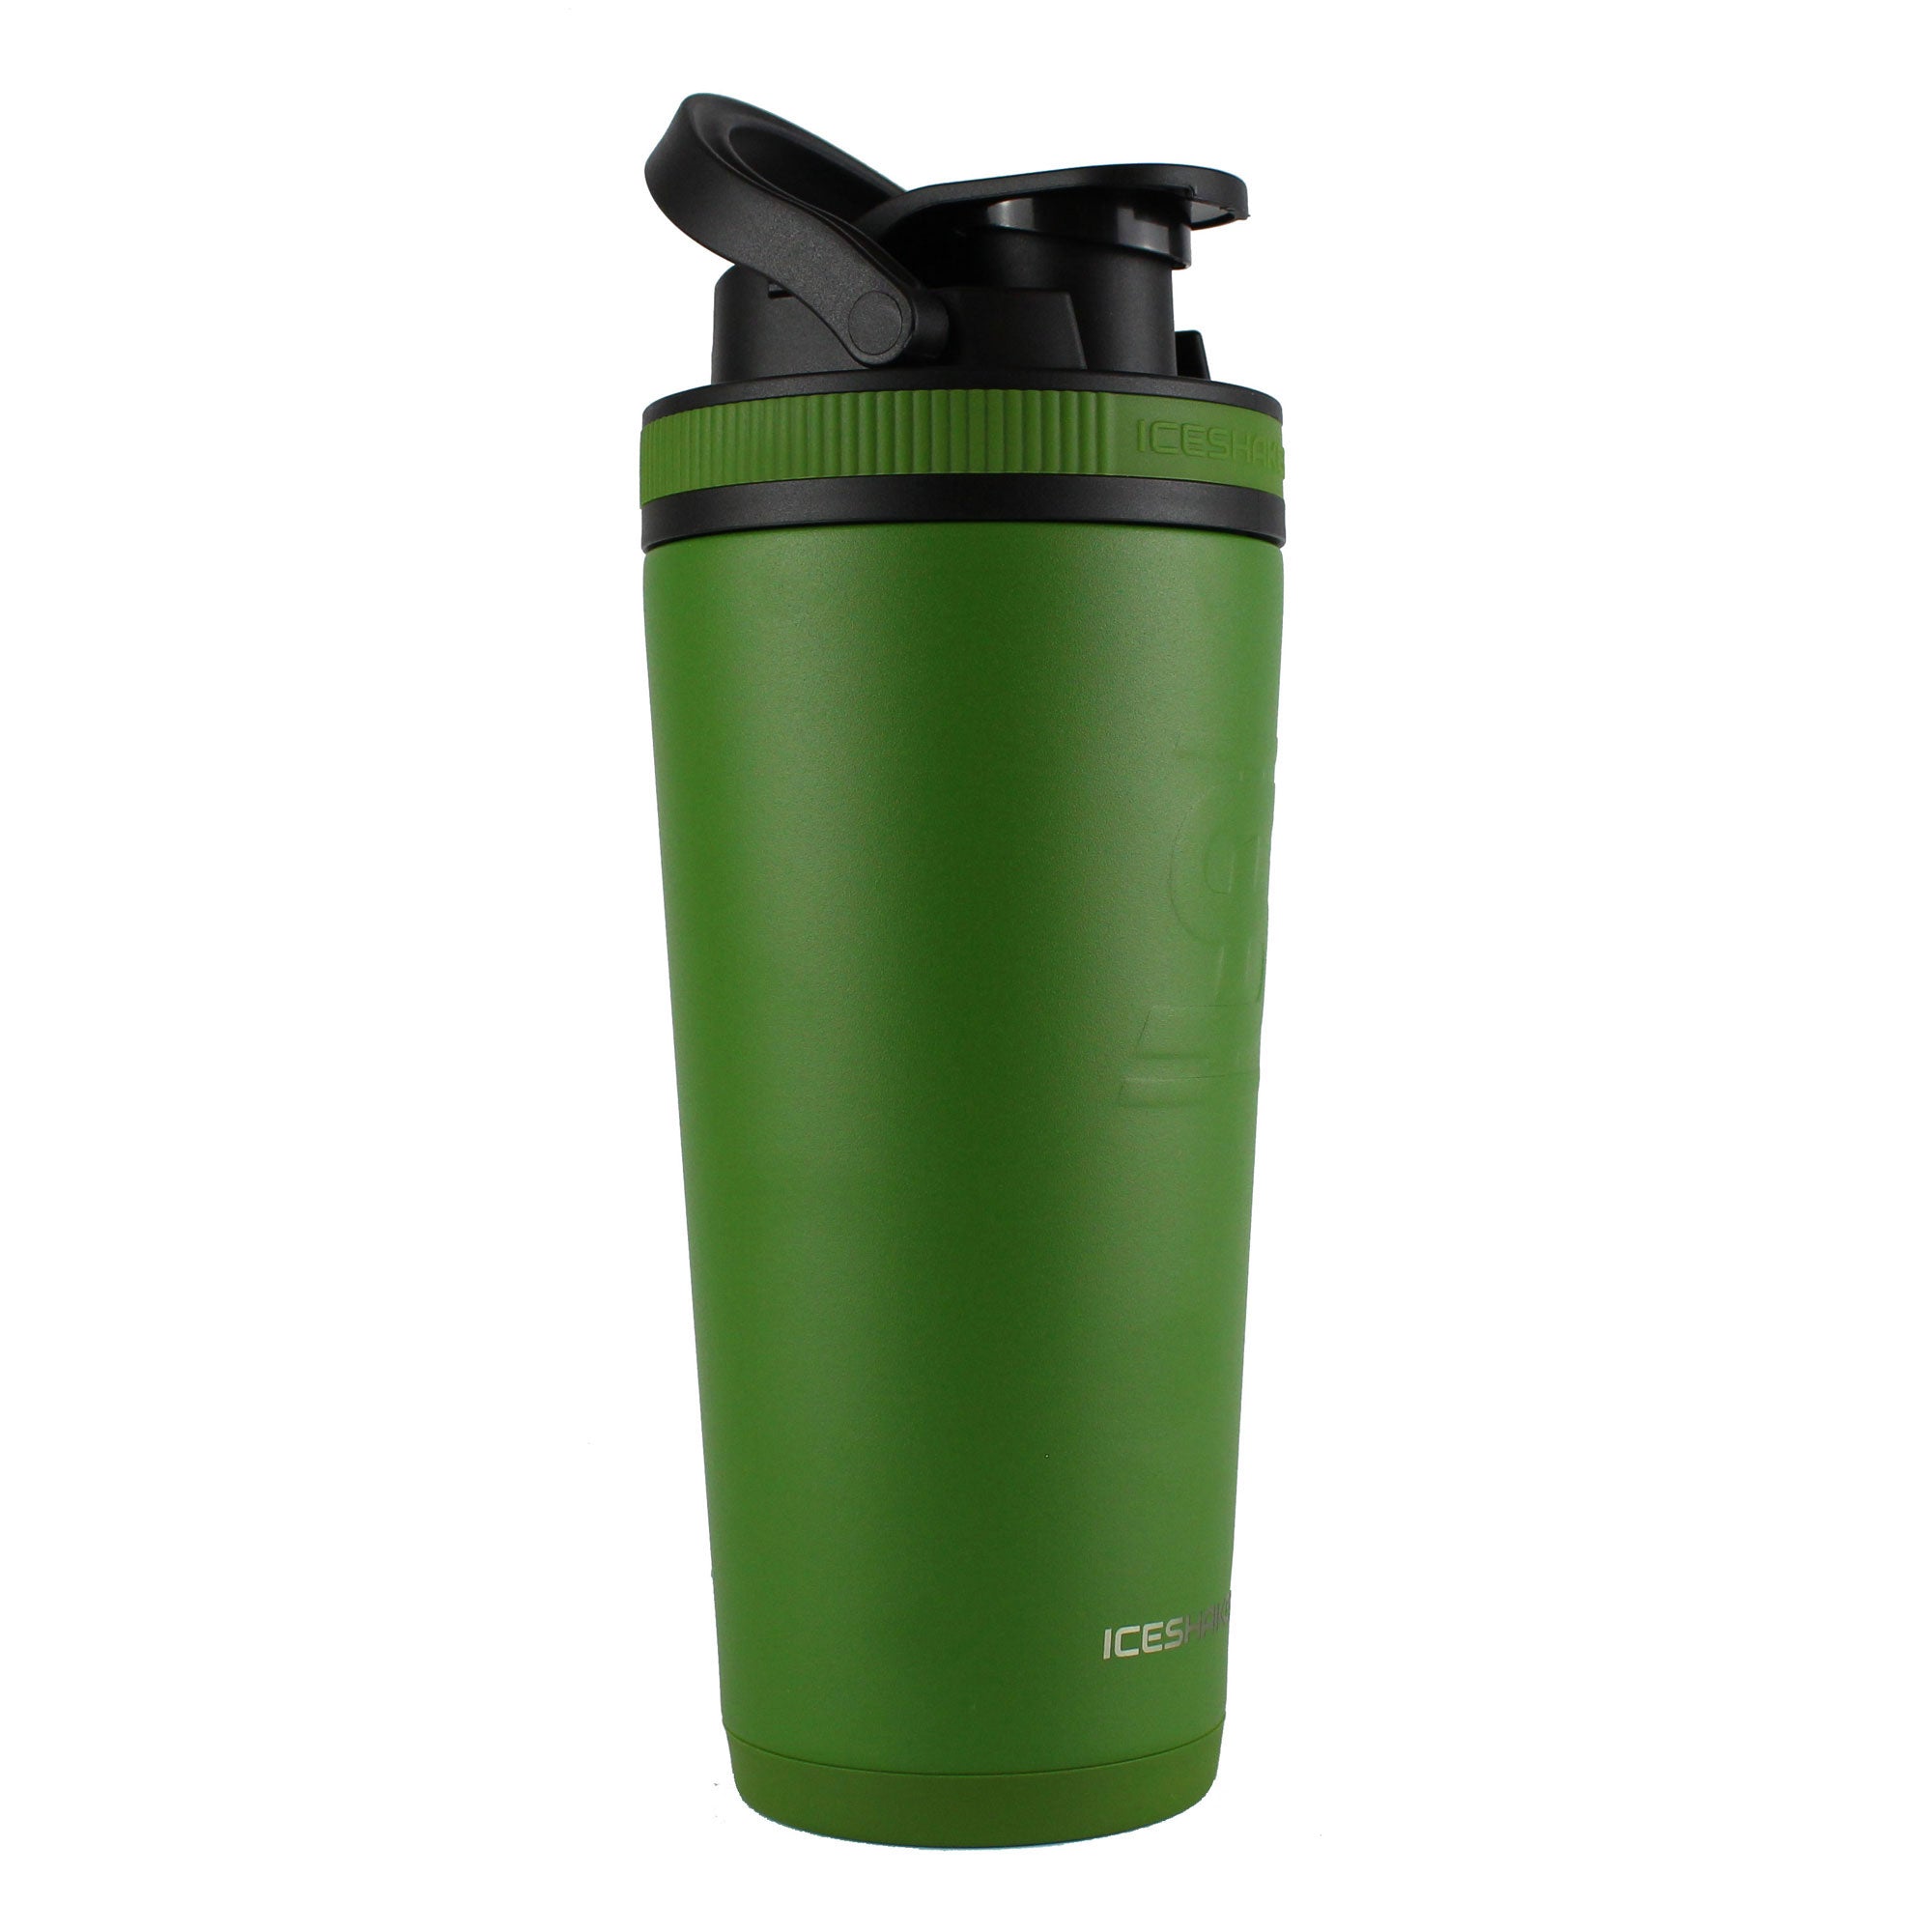 Officially Licensed University of Miami 26oz Ice Shaker - Green